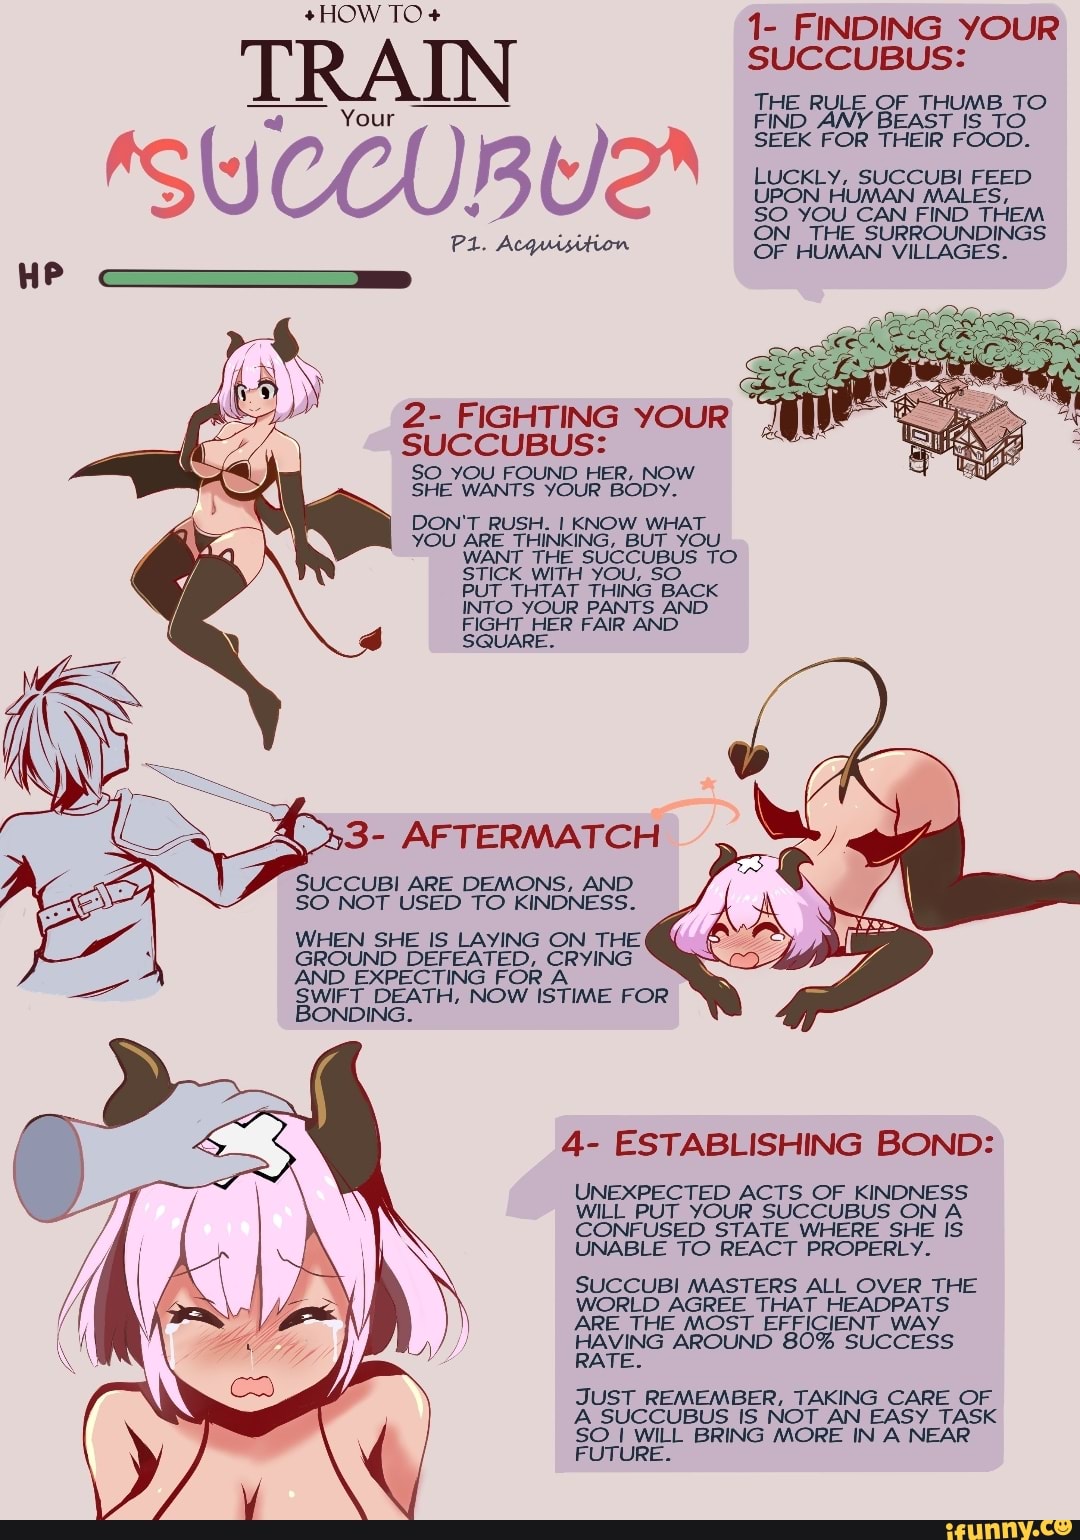 How to train your succubus